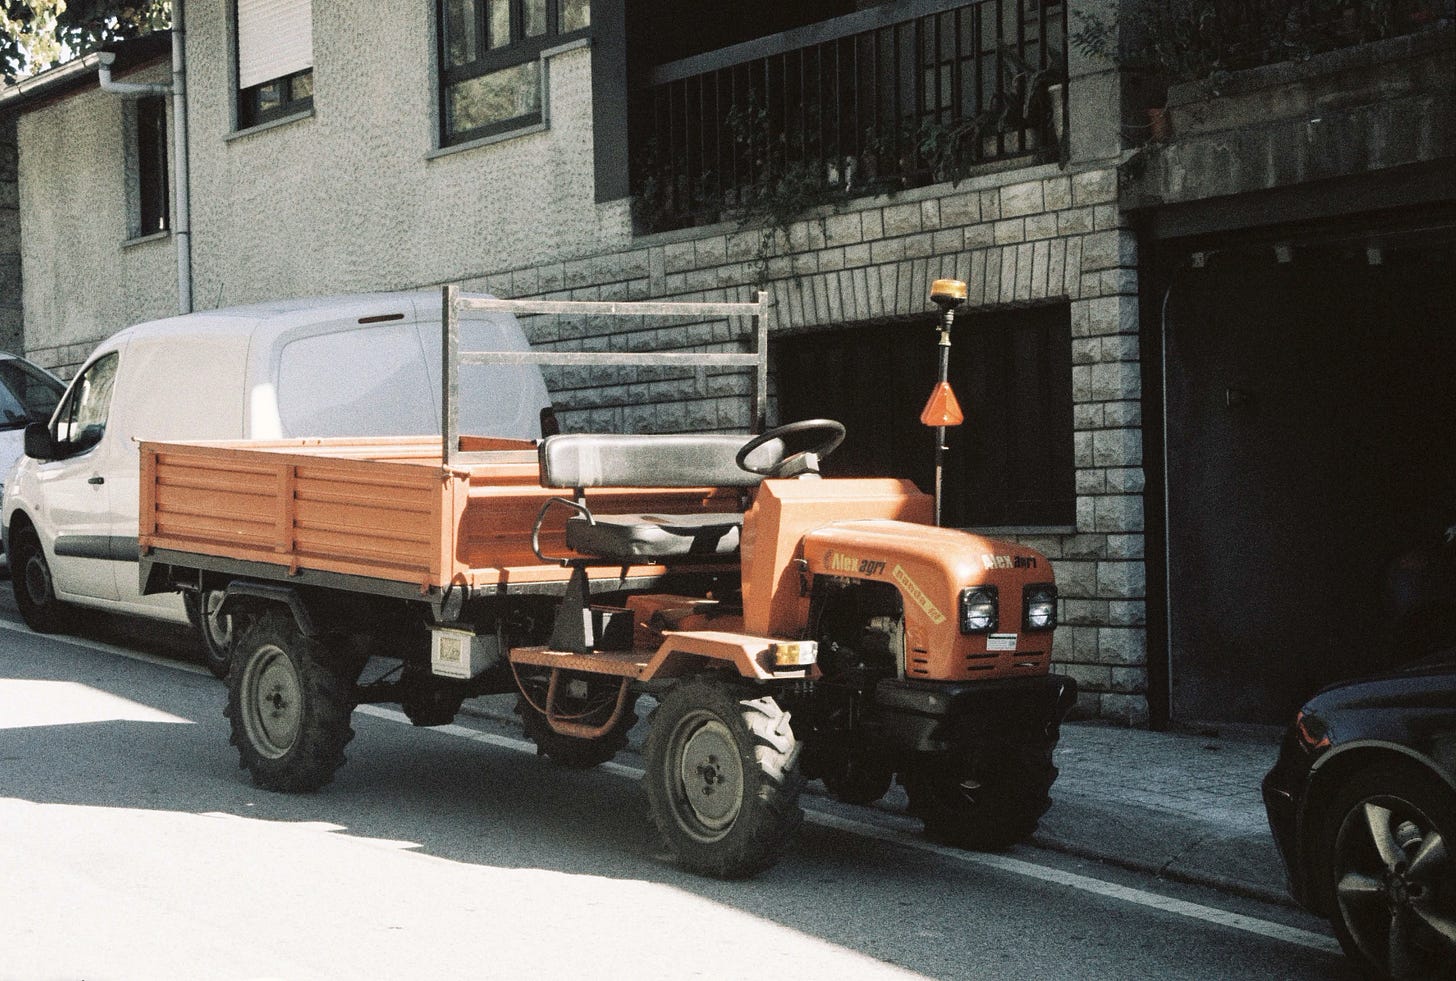 A small red truck used to transport the grapes.